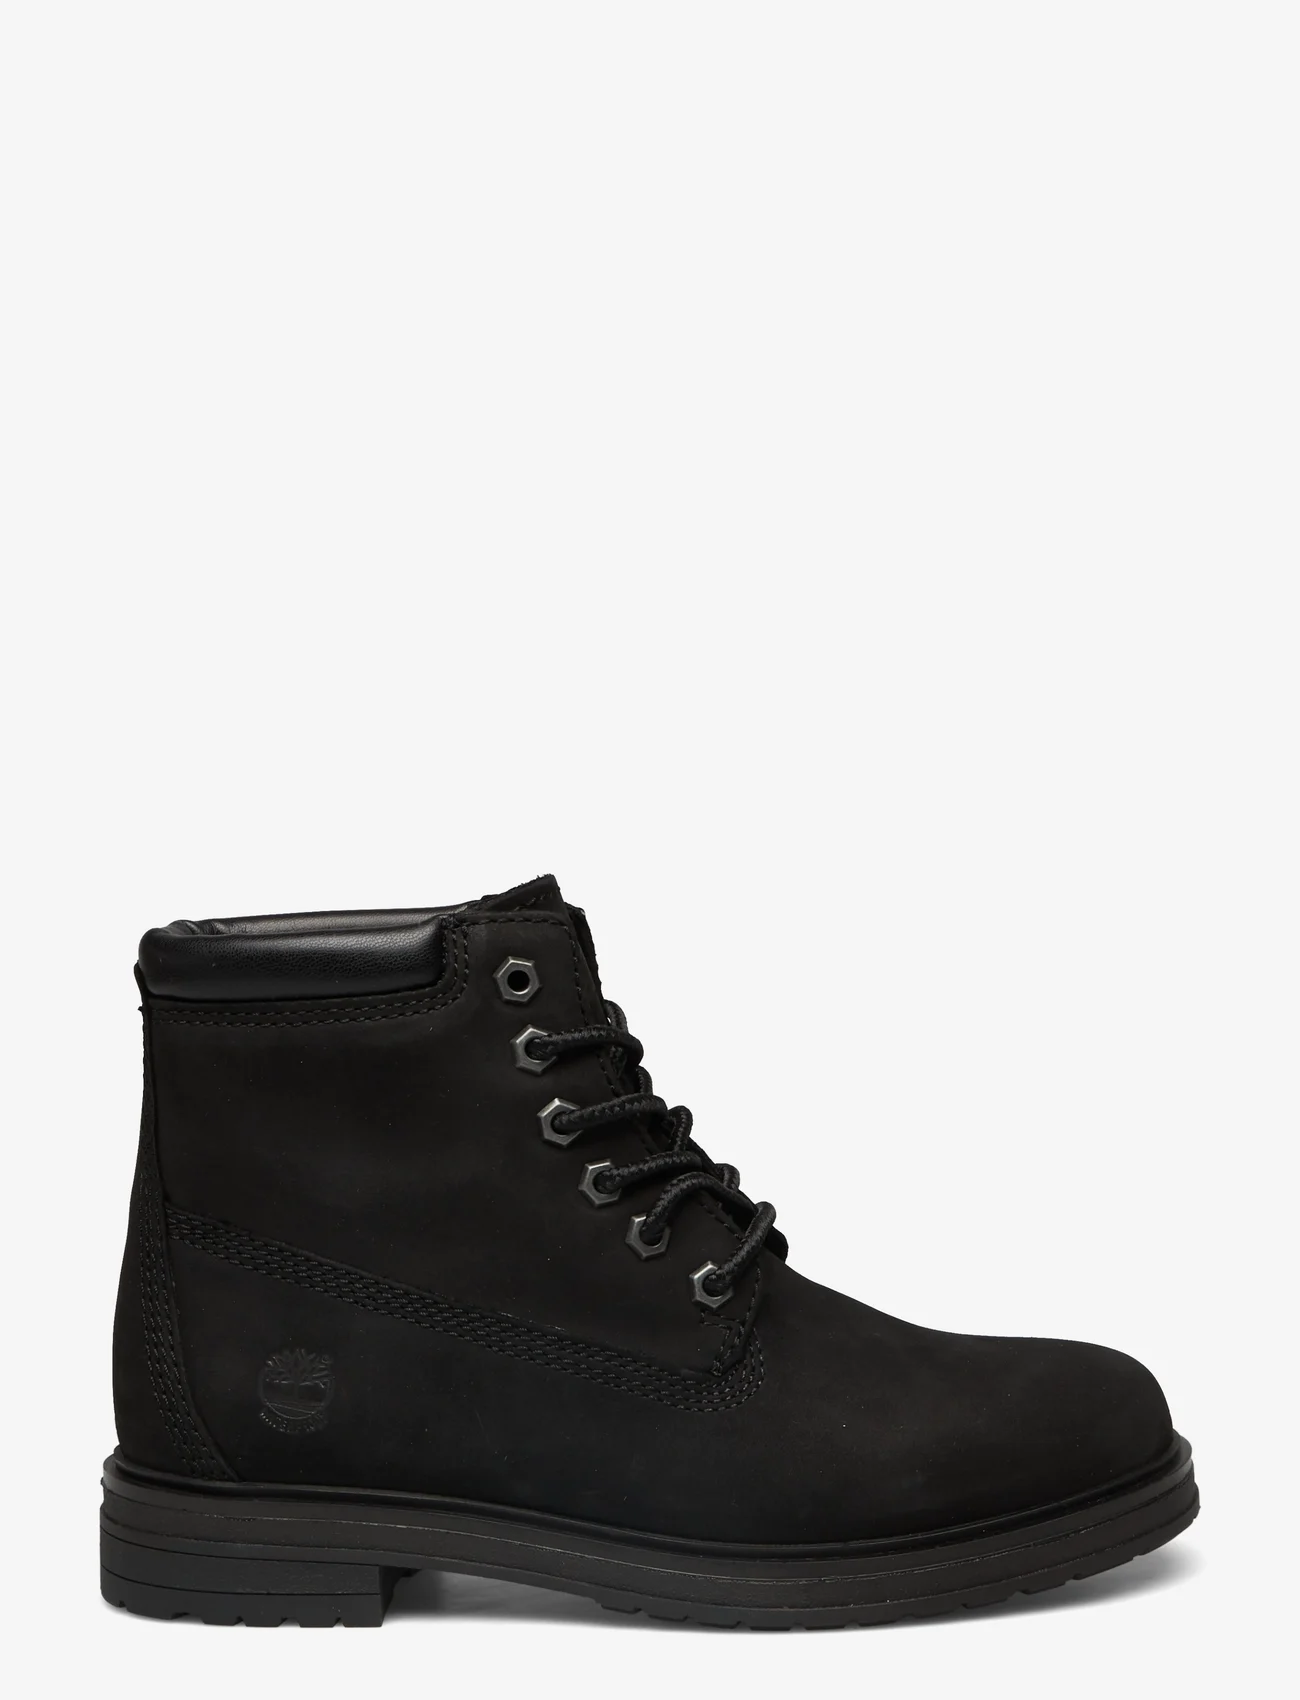 Timberland - Hannover Hill 6in Boot WP - snøreboots - black - 1